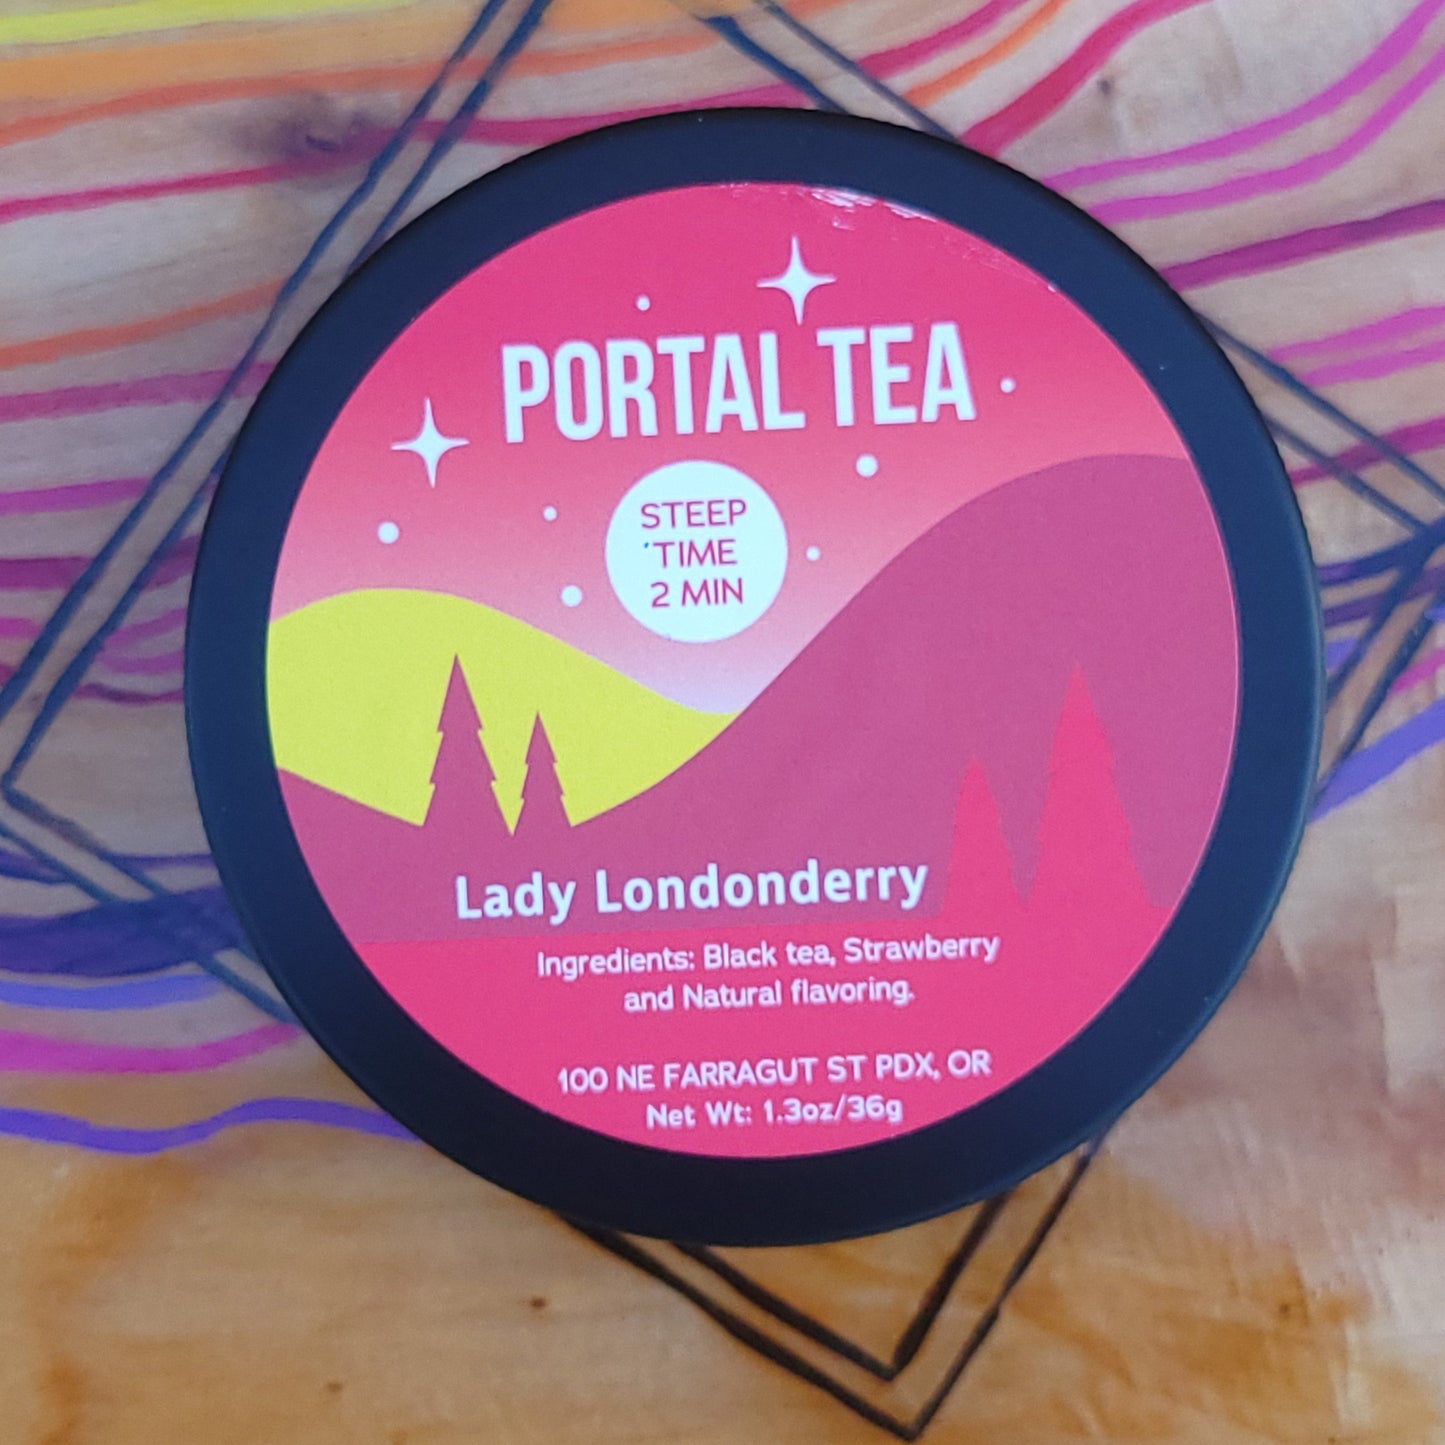 Lady Londonderry